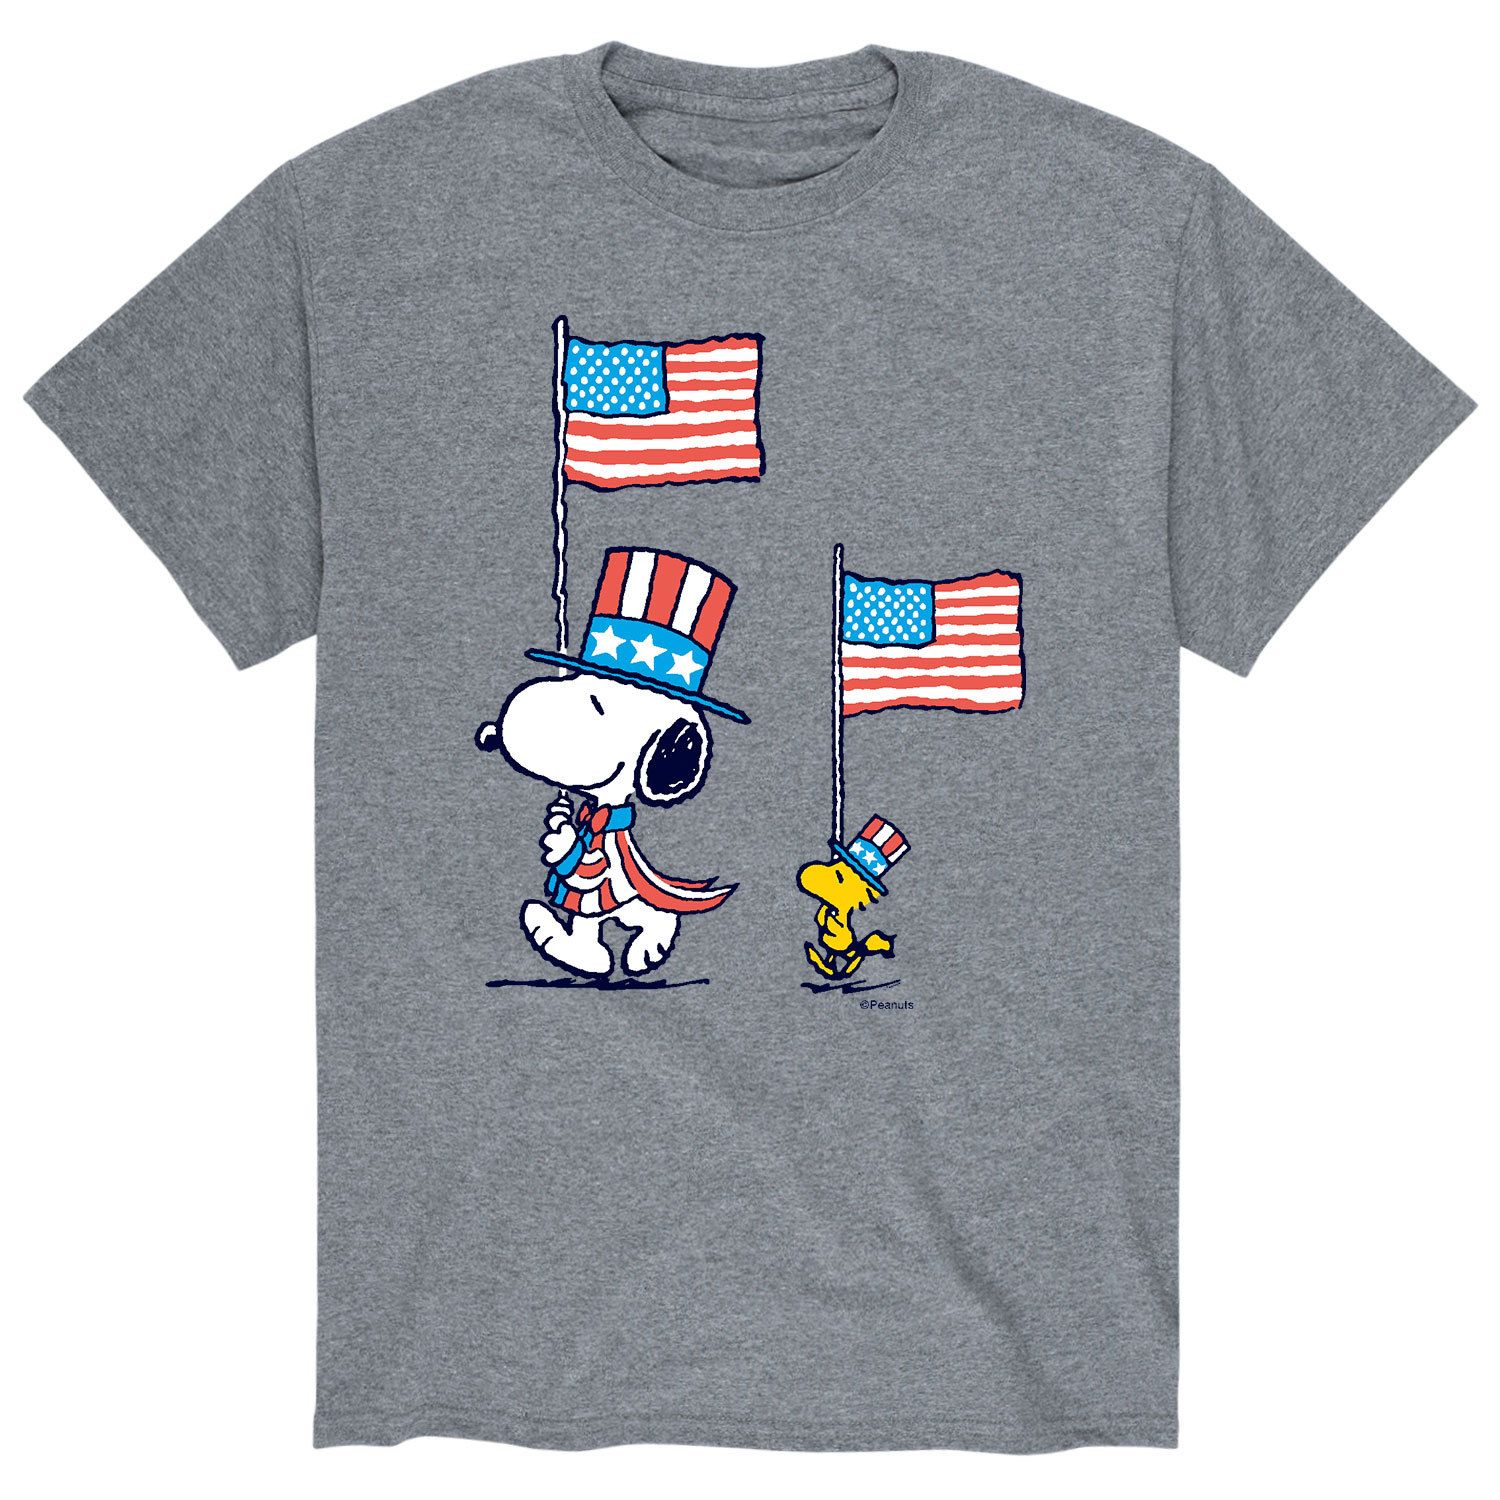 Мужская футболка Peanuts Snoopy Woodstock March Licensed Character мужская футболка peanuts snoopy woodstock walking licensed character